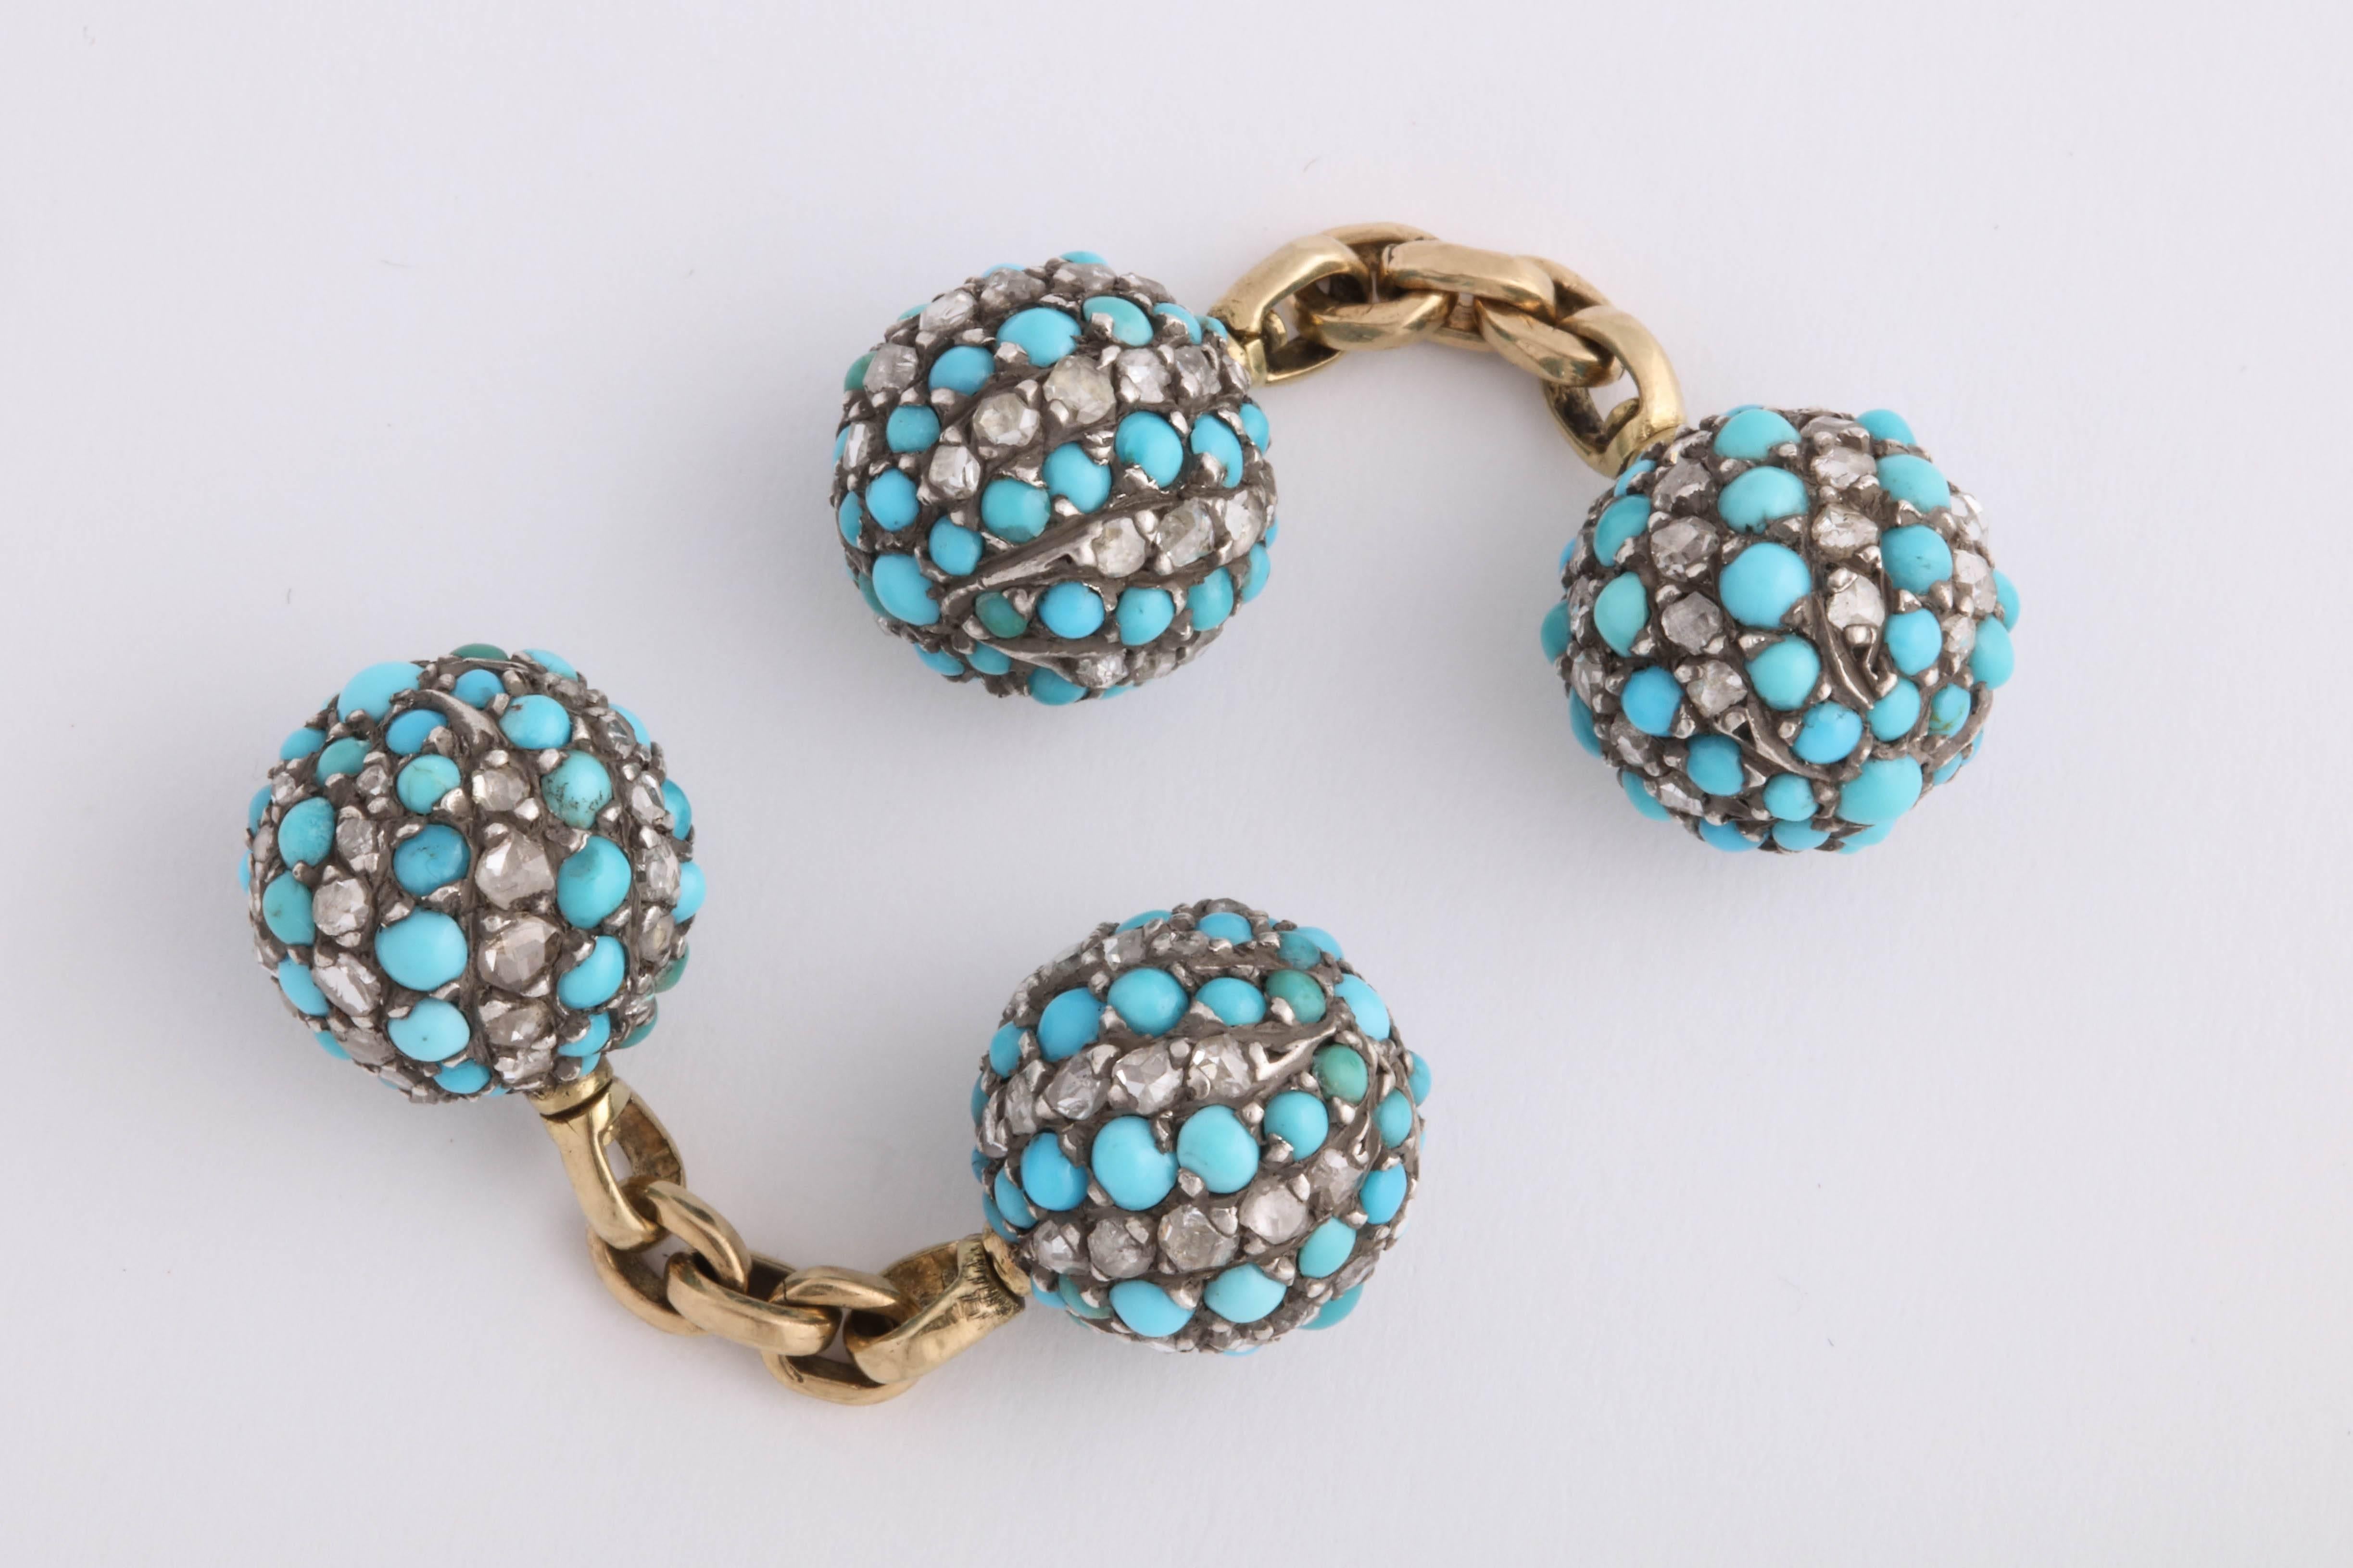 Very rare ball cufflinks with a yellow gold chain in between. Each ball is set with turquoise and rose cut diamonds in silver in a swirling design. Victorian, c. 1880s. 